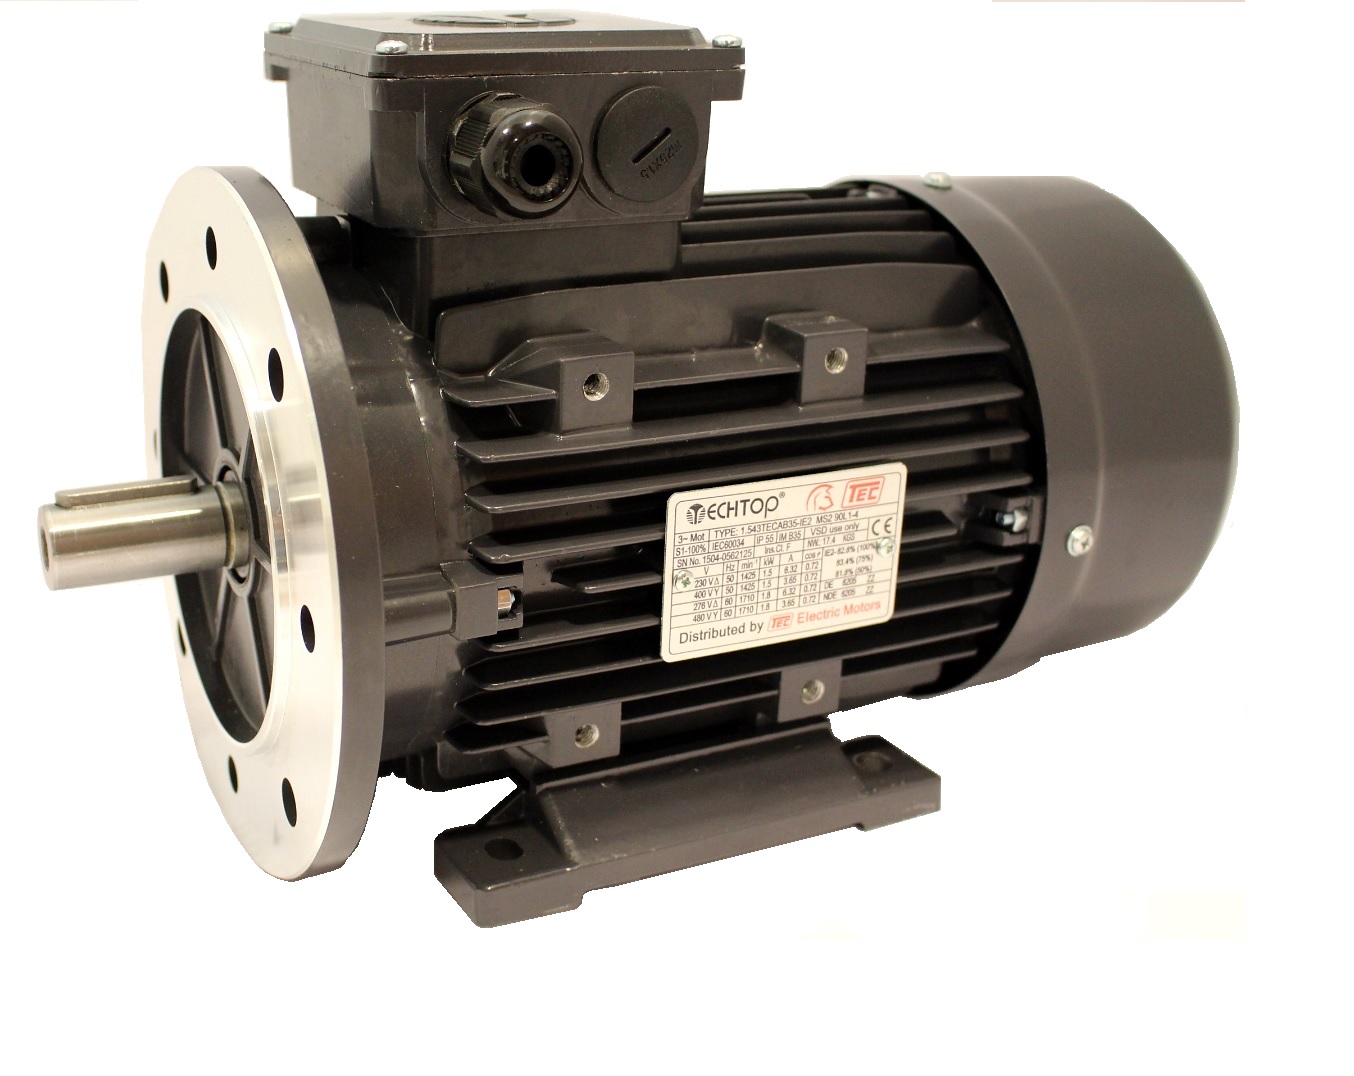 "TEC Three Phase 400v Electric Motor, 7.5Kw 4 pole 1500rpm with flange